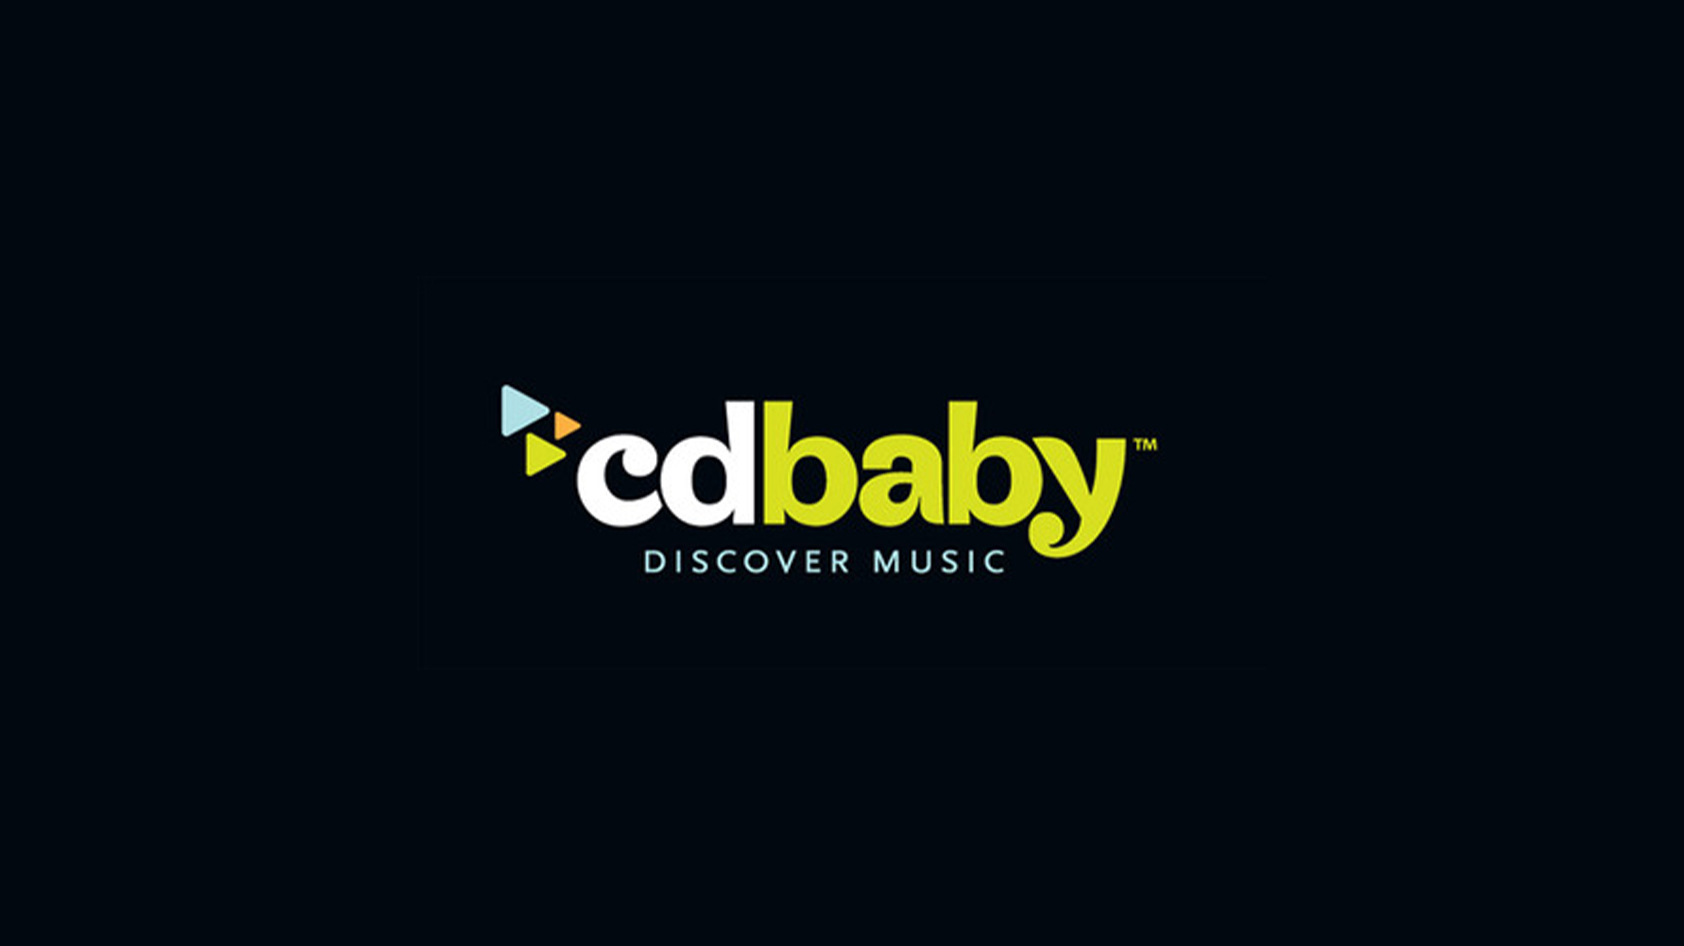 A picture of the CD Baby logo against a black background with the text &quot;discover music&quot; under the logo.